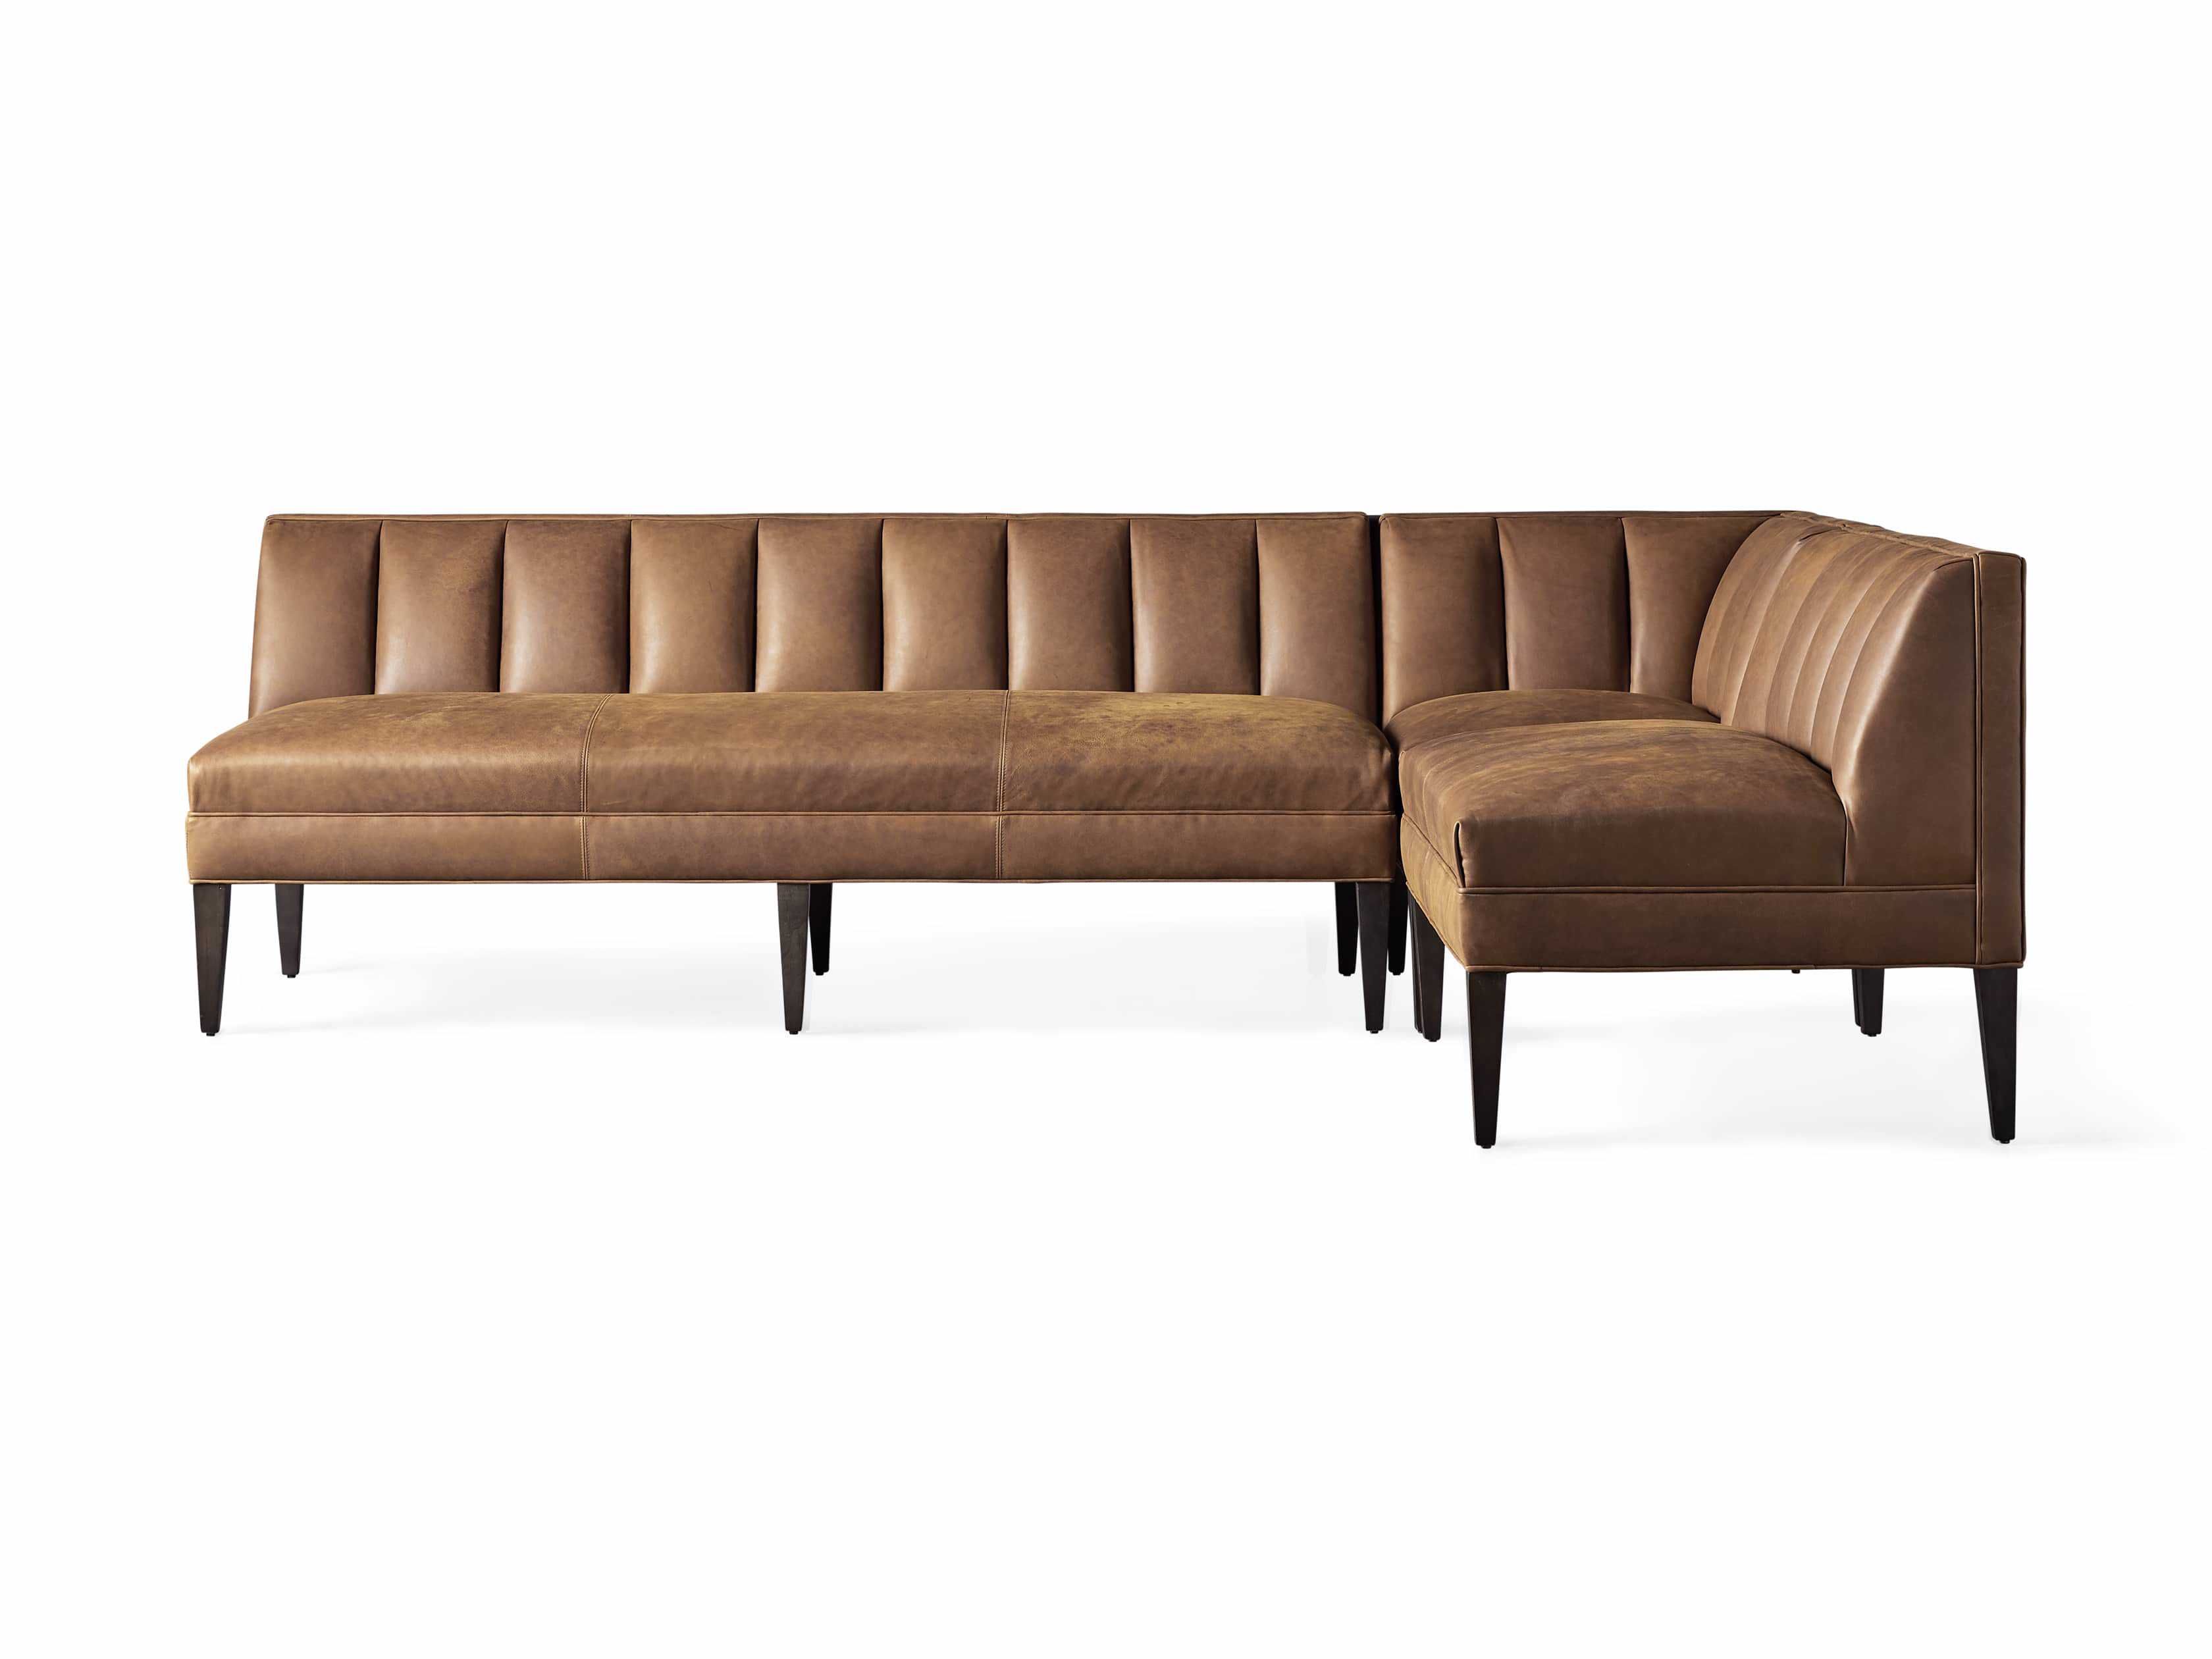 Gates Leather Banquette | Arhaus